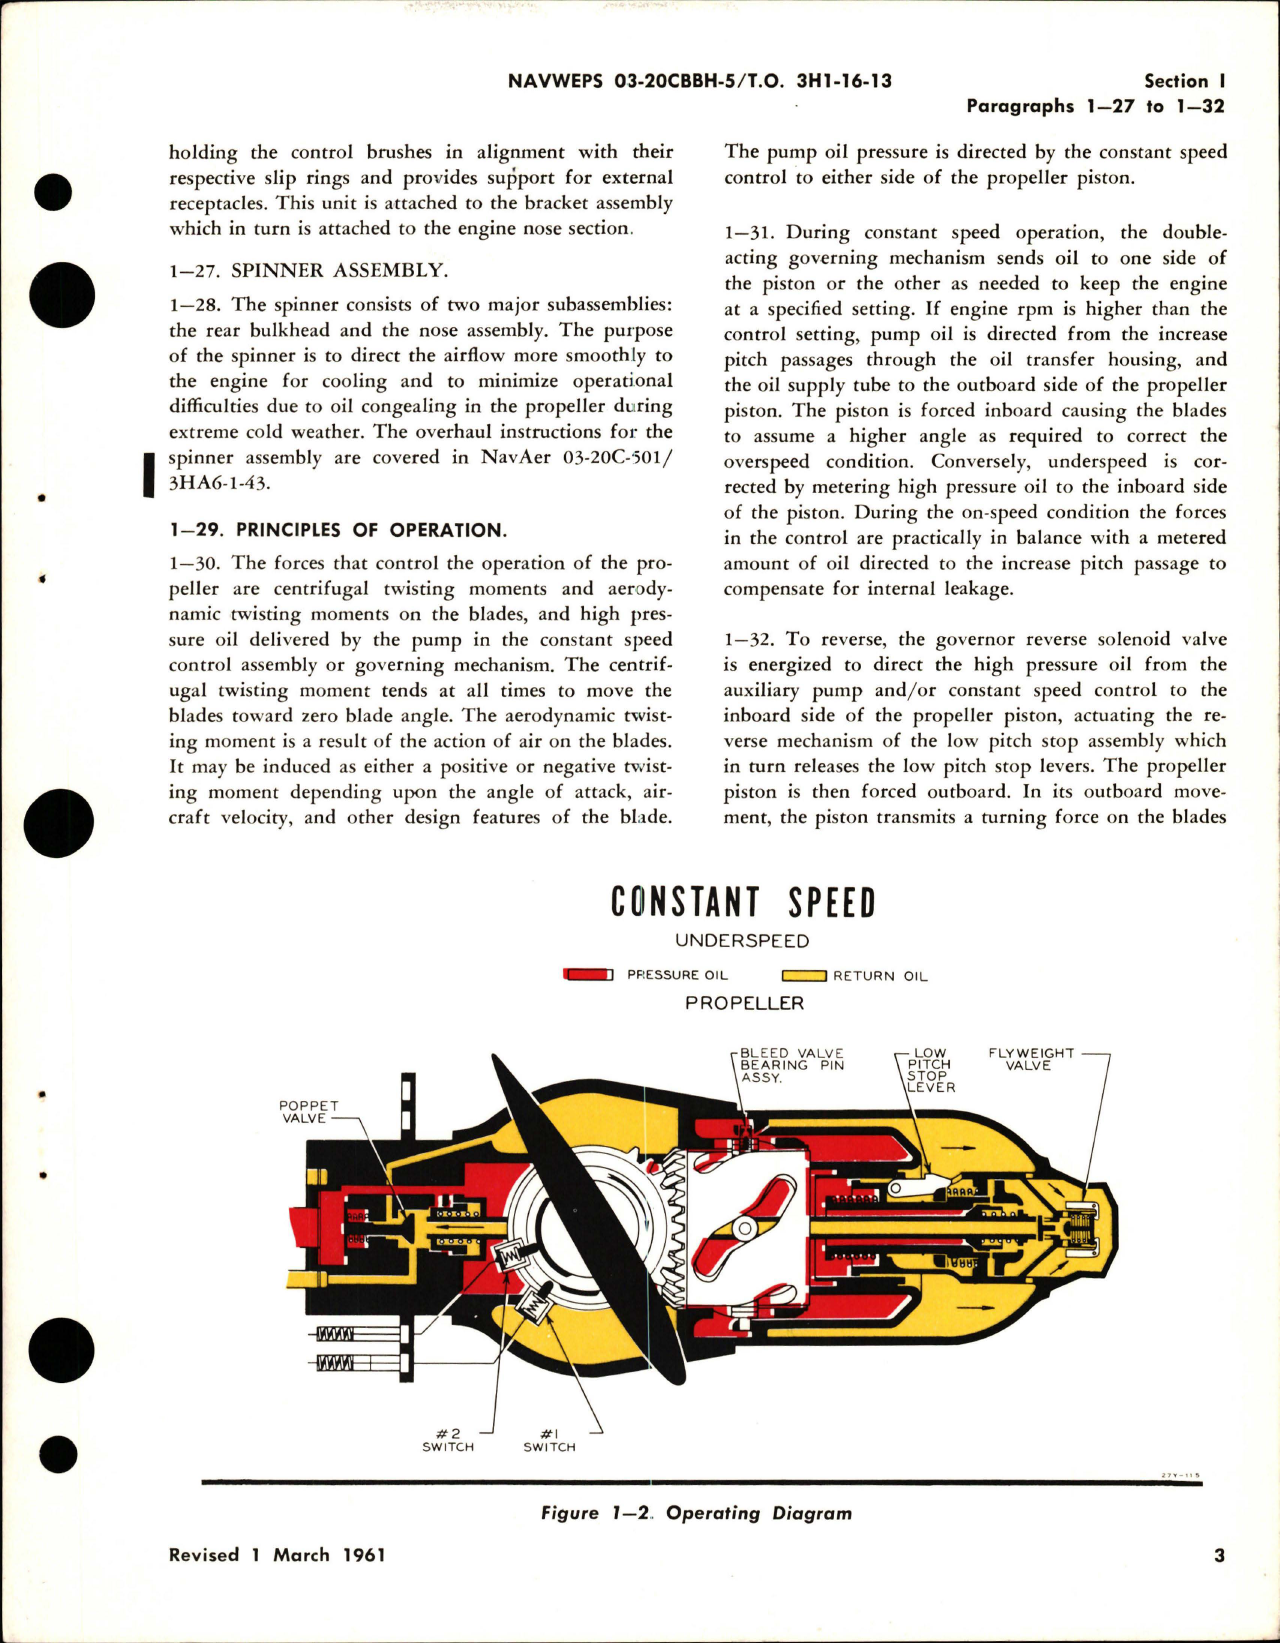 Sample page 5 from AirCorps Library document: Overhaul Instructions for Variable Pitch Propeller - Models 43H60-359, 43H60-383, and 43H60-395